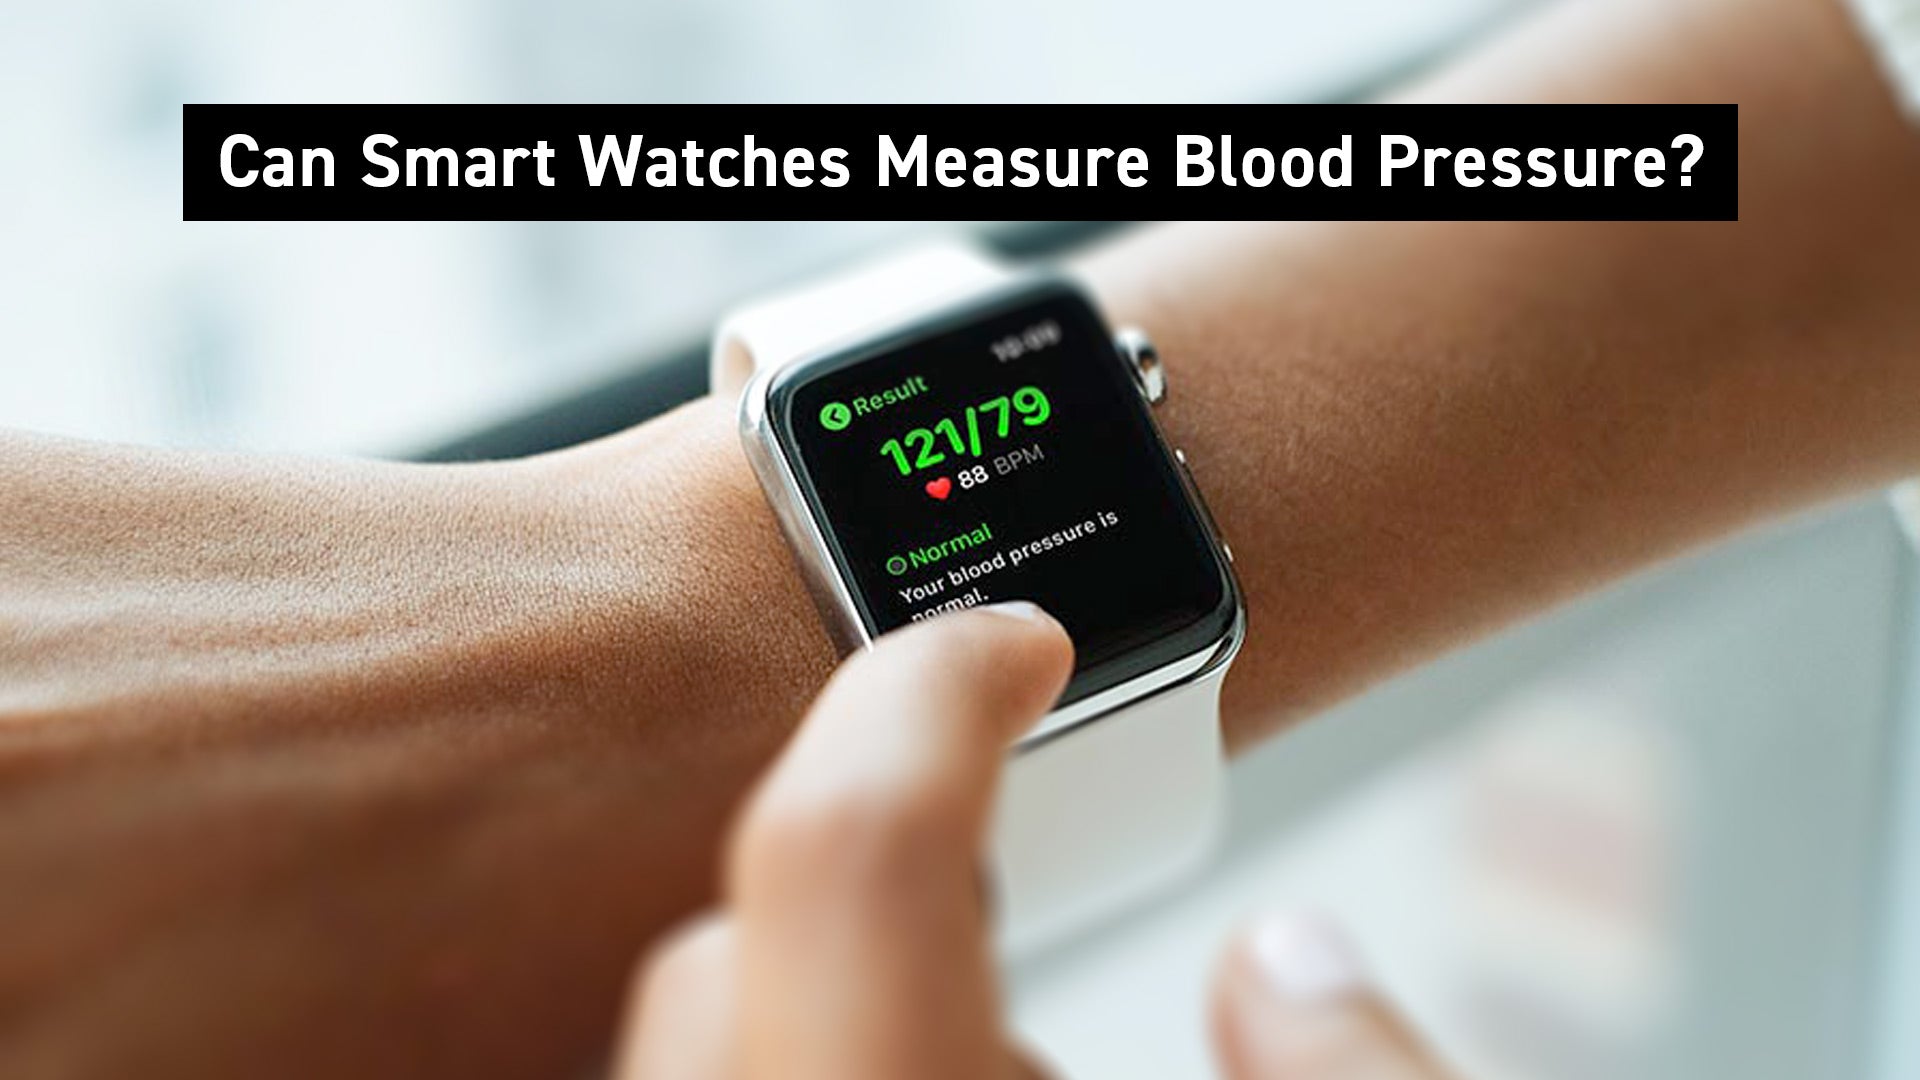 Can Smartwatches Measure Blood Pressure?